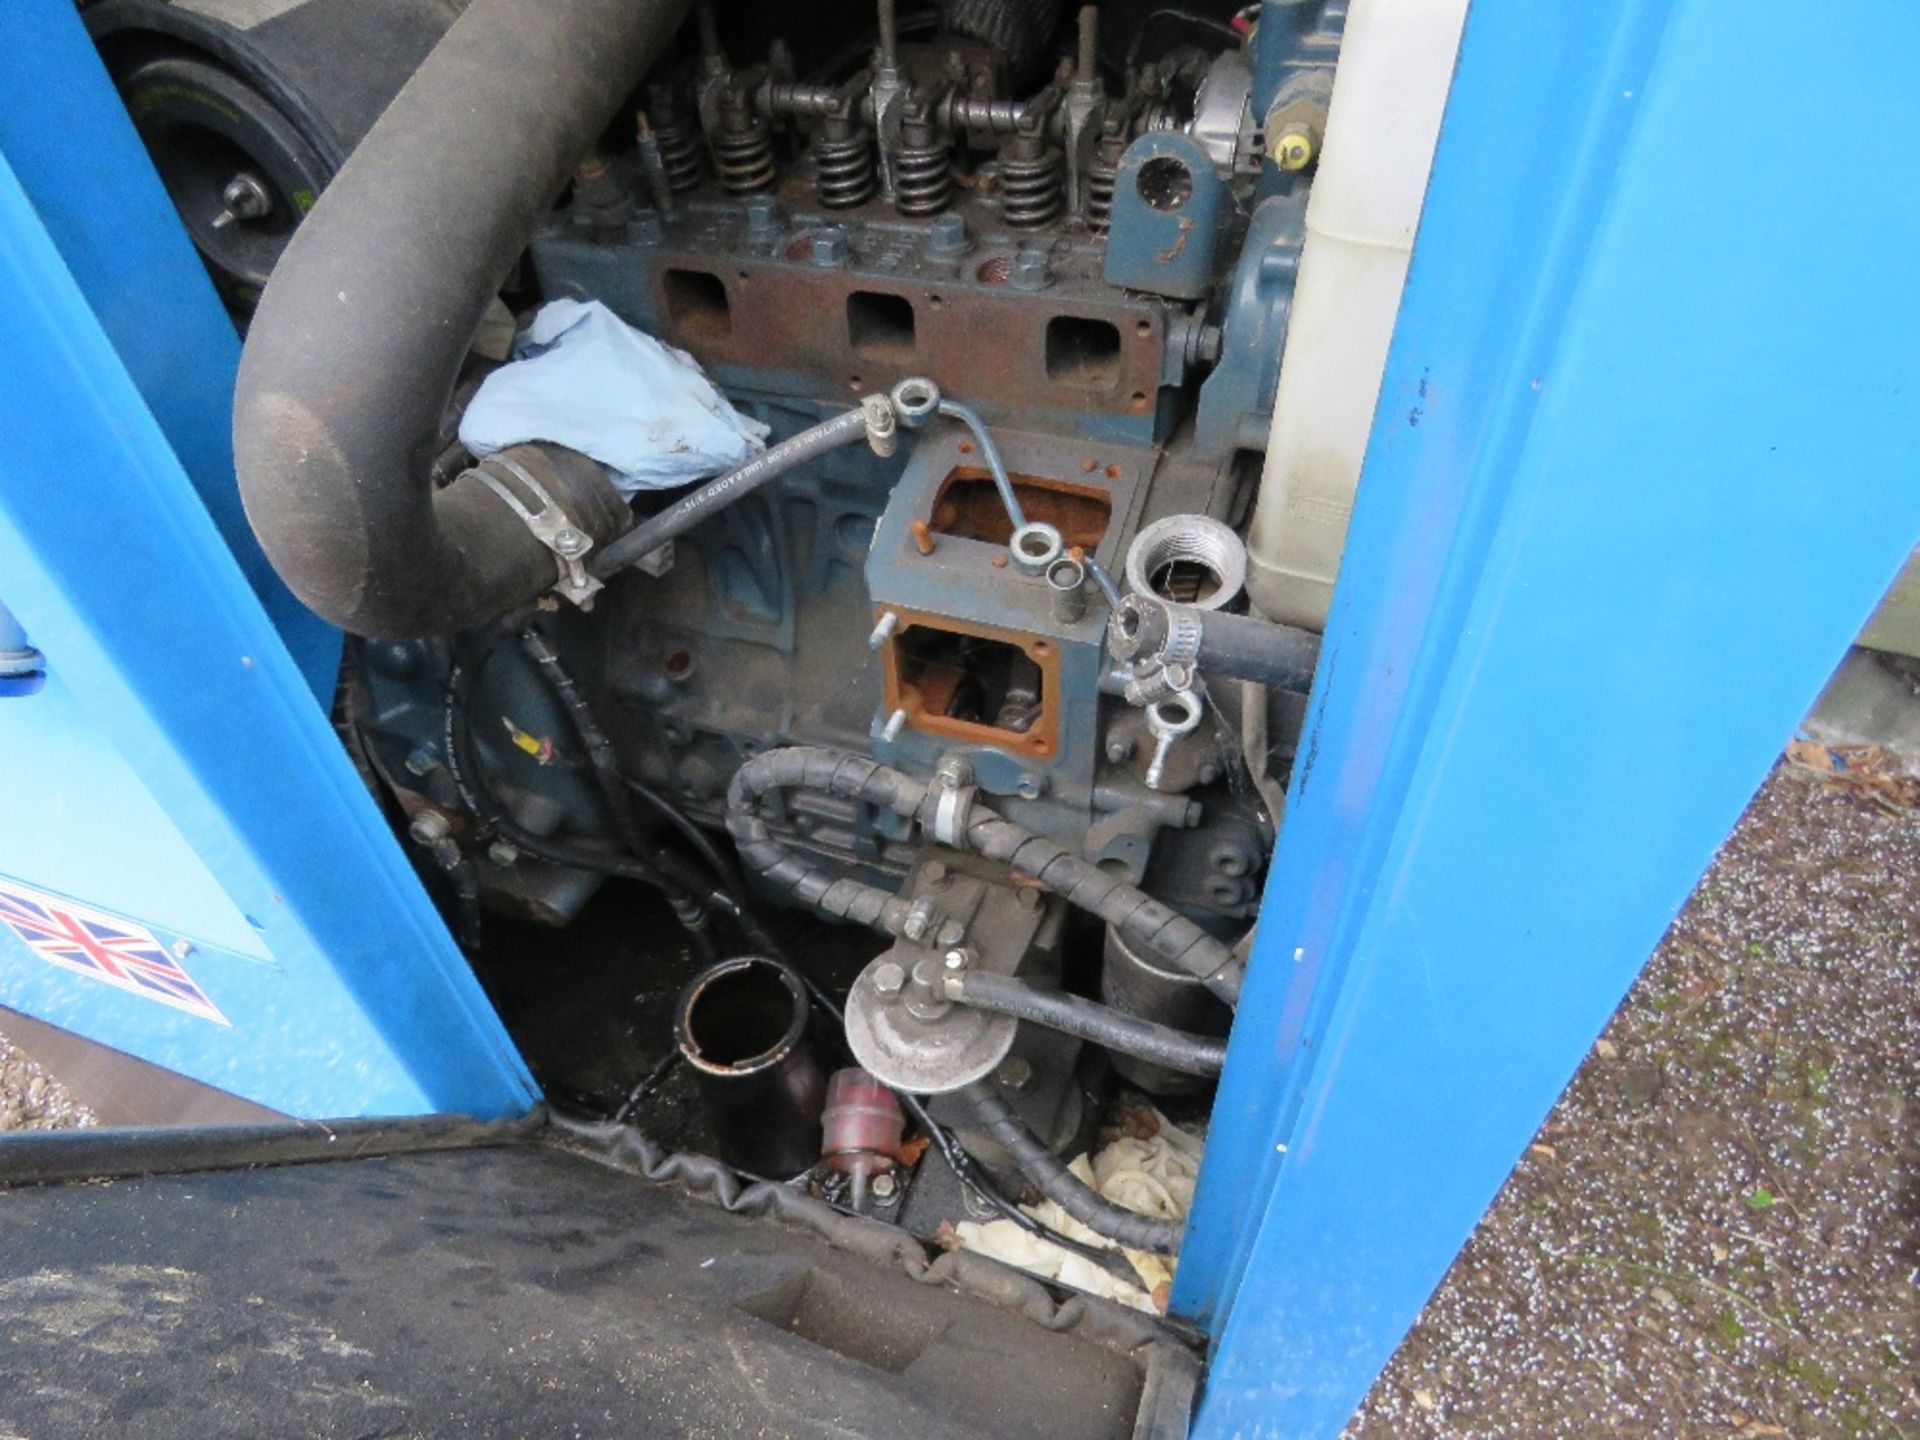 STEPHILL 10KVA COMPACT GENERATOR SET, KUBOTA 3 CYLINDER DIESEL ENGINE. PARTS MISSING AS SHOWN. PREVI - Image 4 of 7